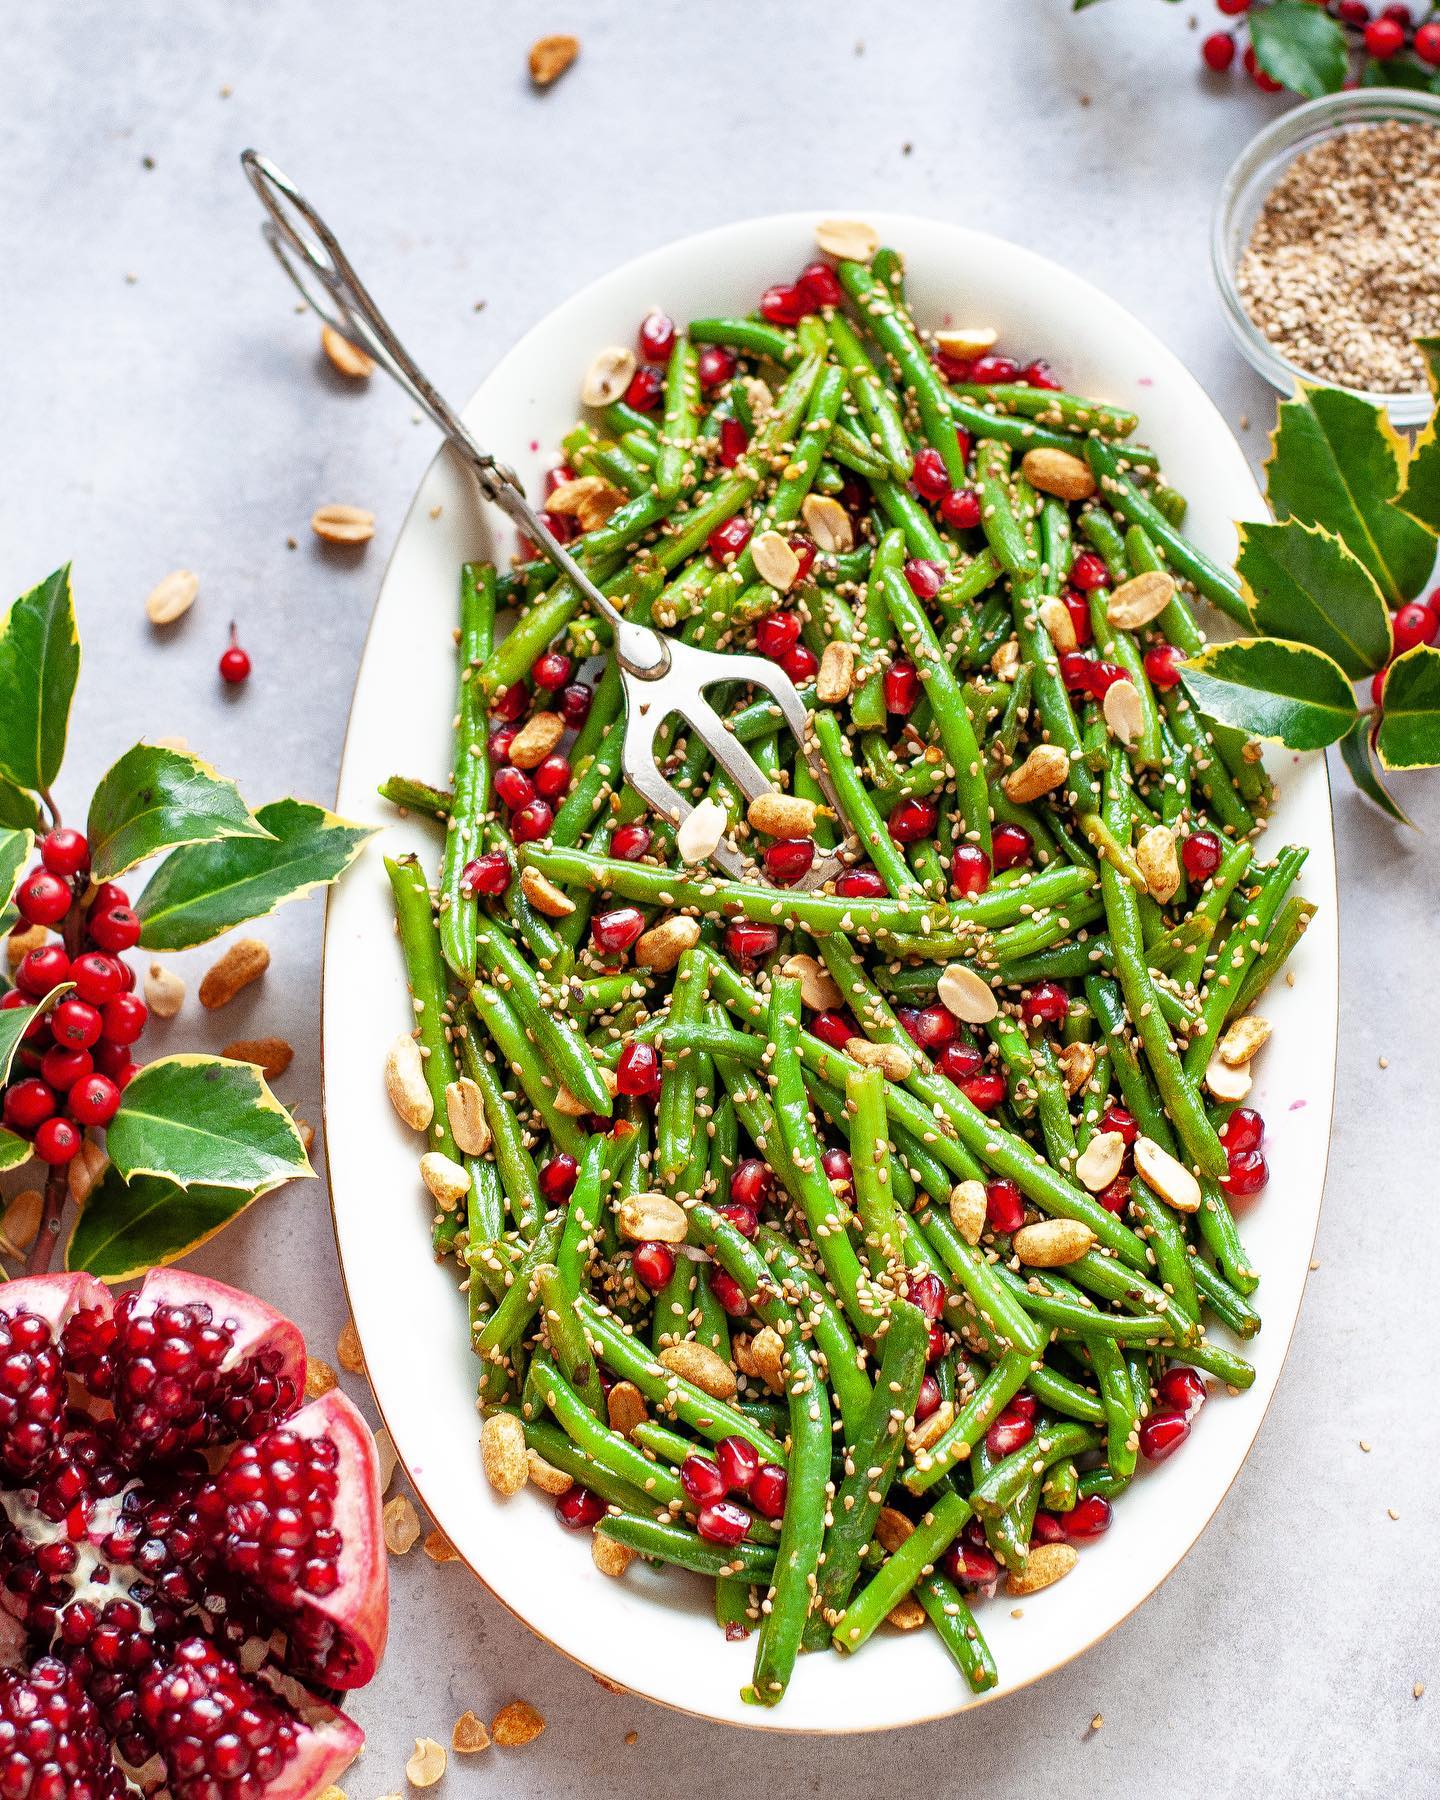 Vegan French Bean Salad with Peanuts and Pomegranate